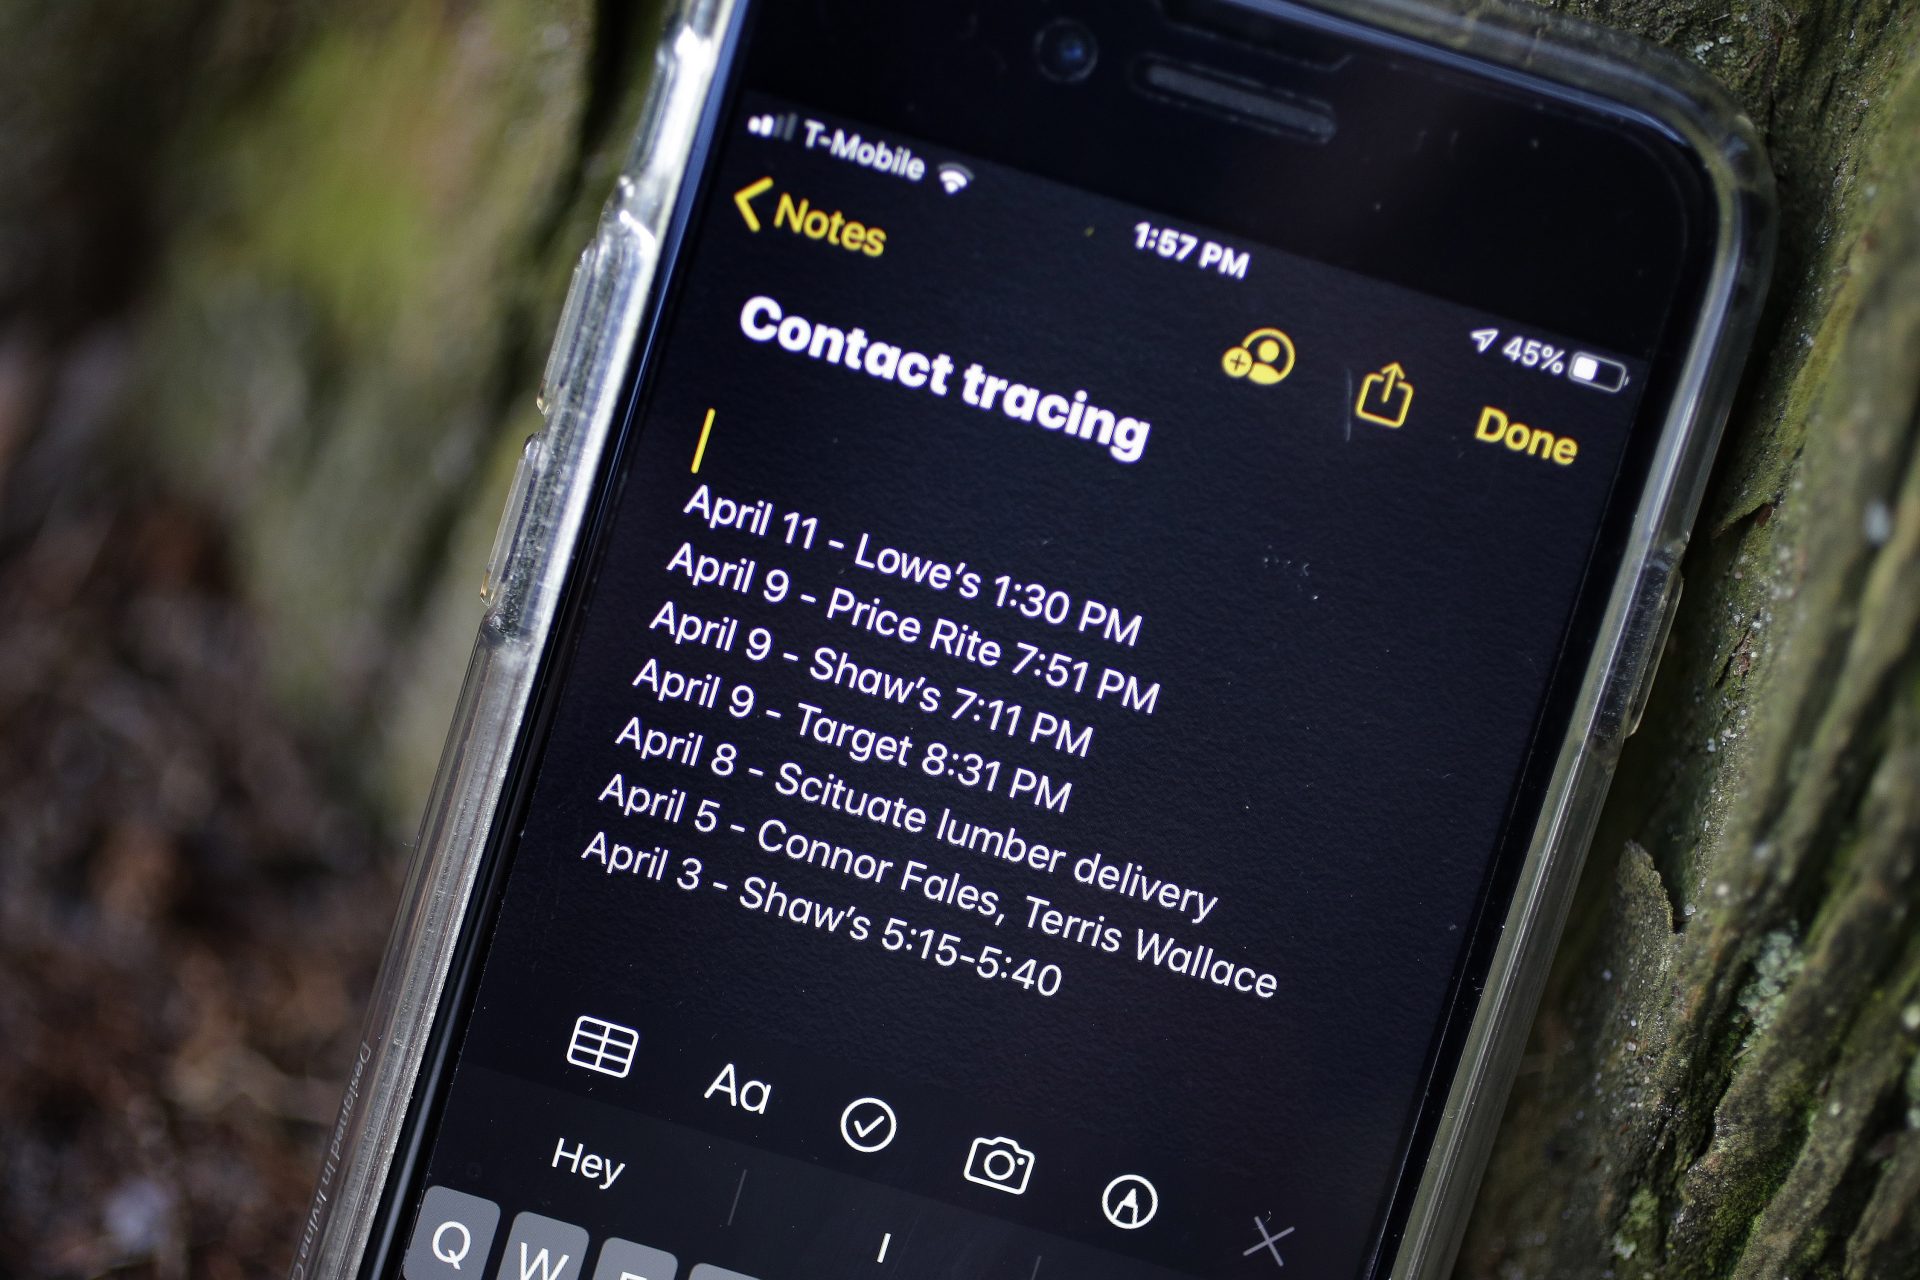 A smartphone belonging to Drew Grande, 40, of Cranston, R.I., shows notes he made for contact tracing Wednesday, April 15, 2020. Grande began keeping a log on his phone at the beginning of April.